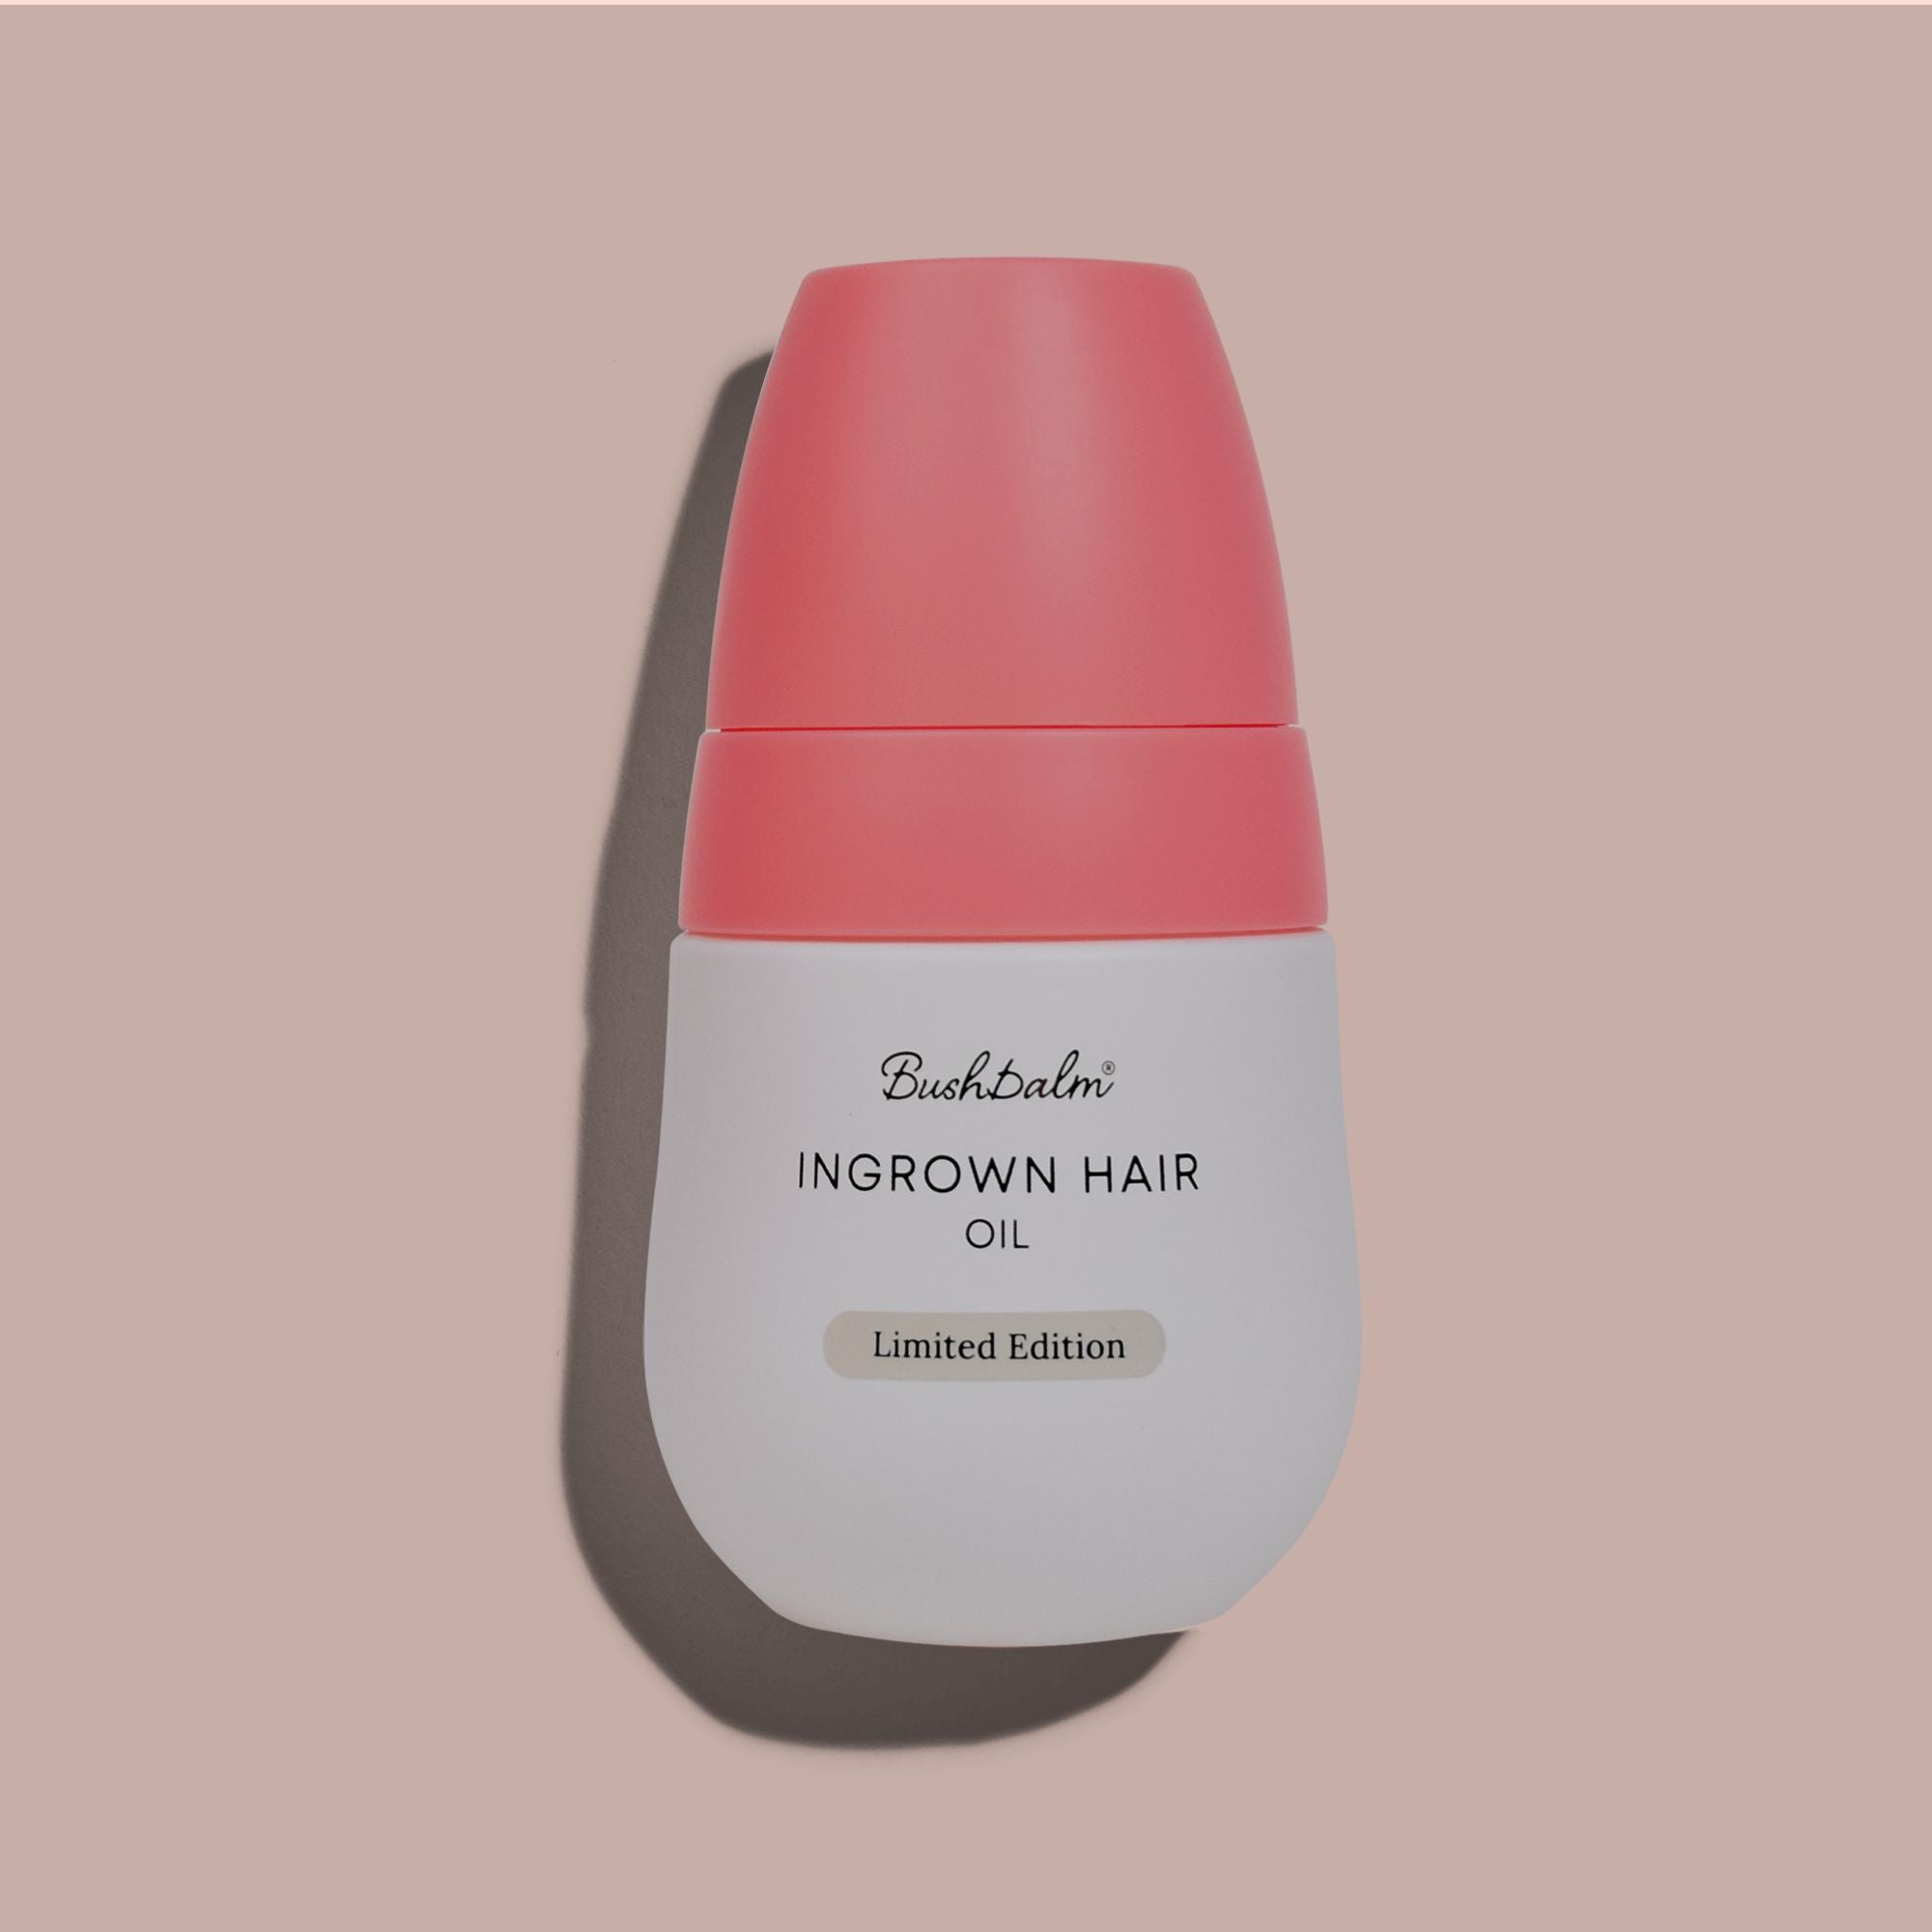 A bottle of ingrown hair oil labeled 'Bushbalm' against a pink background.